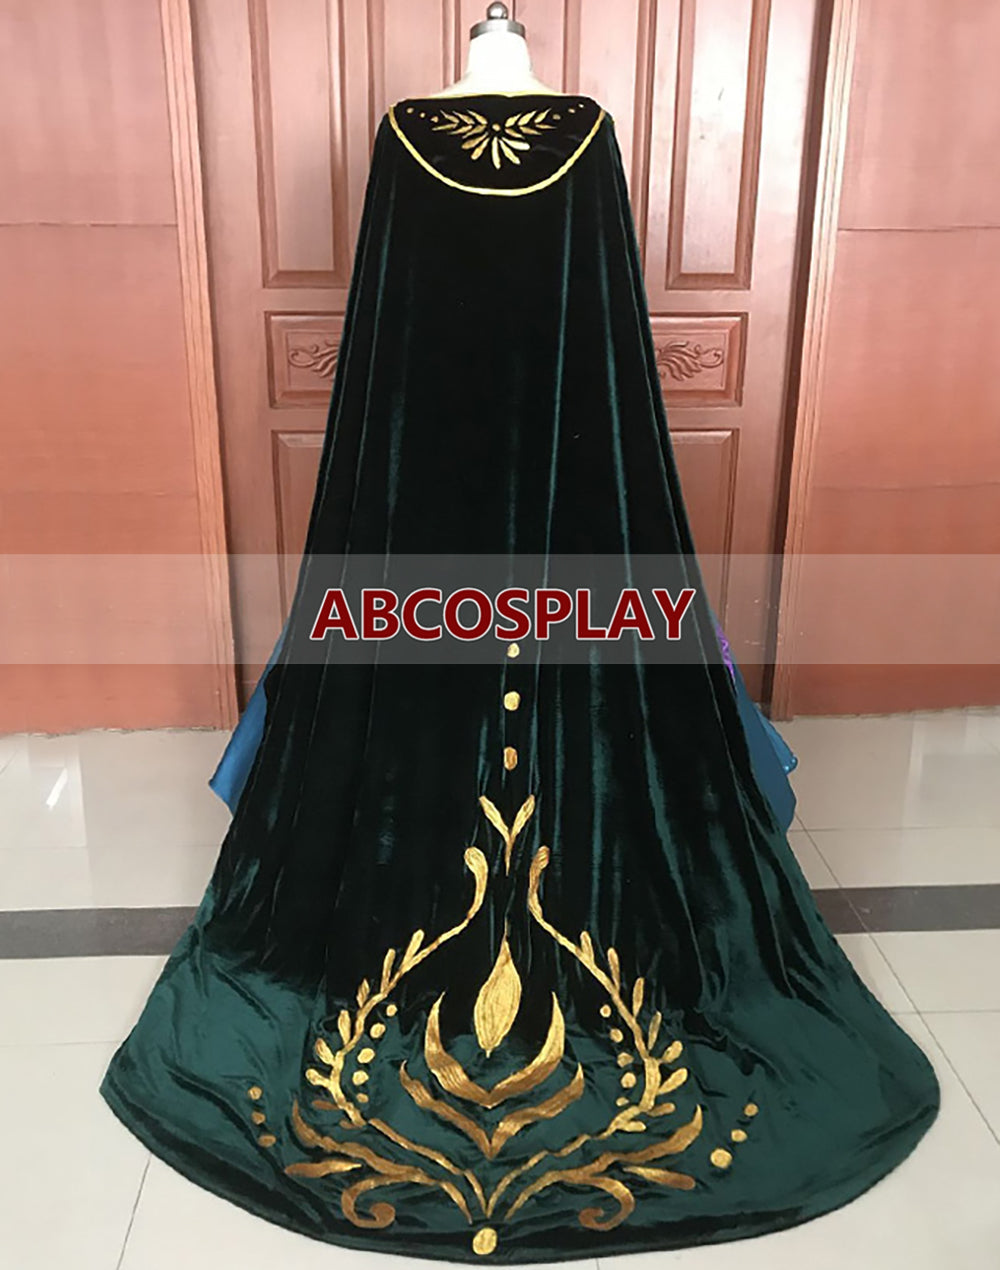 Princess Frozen 2 Anna Embroidery Dress Cosplay Costume Luxury Style